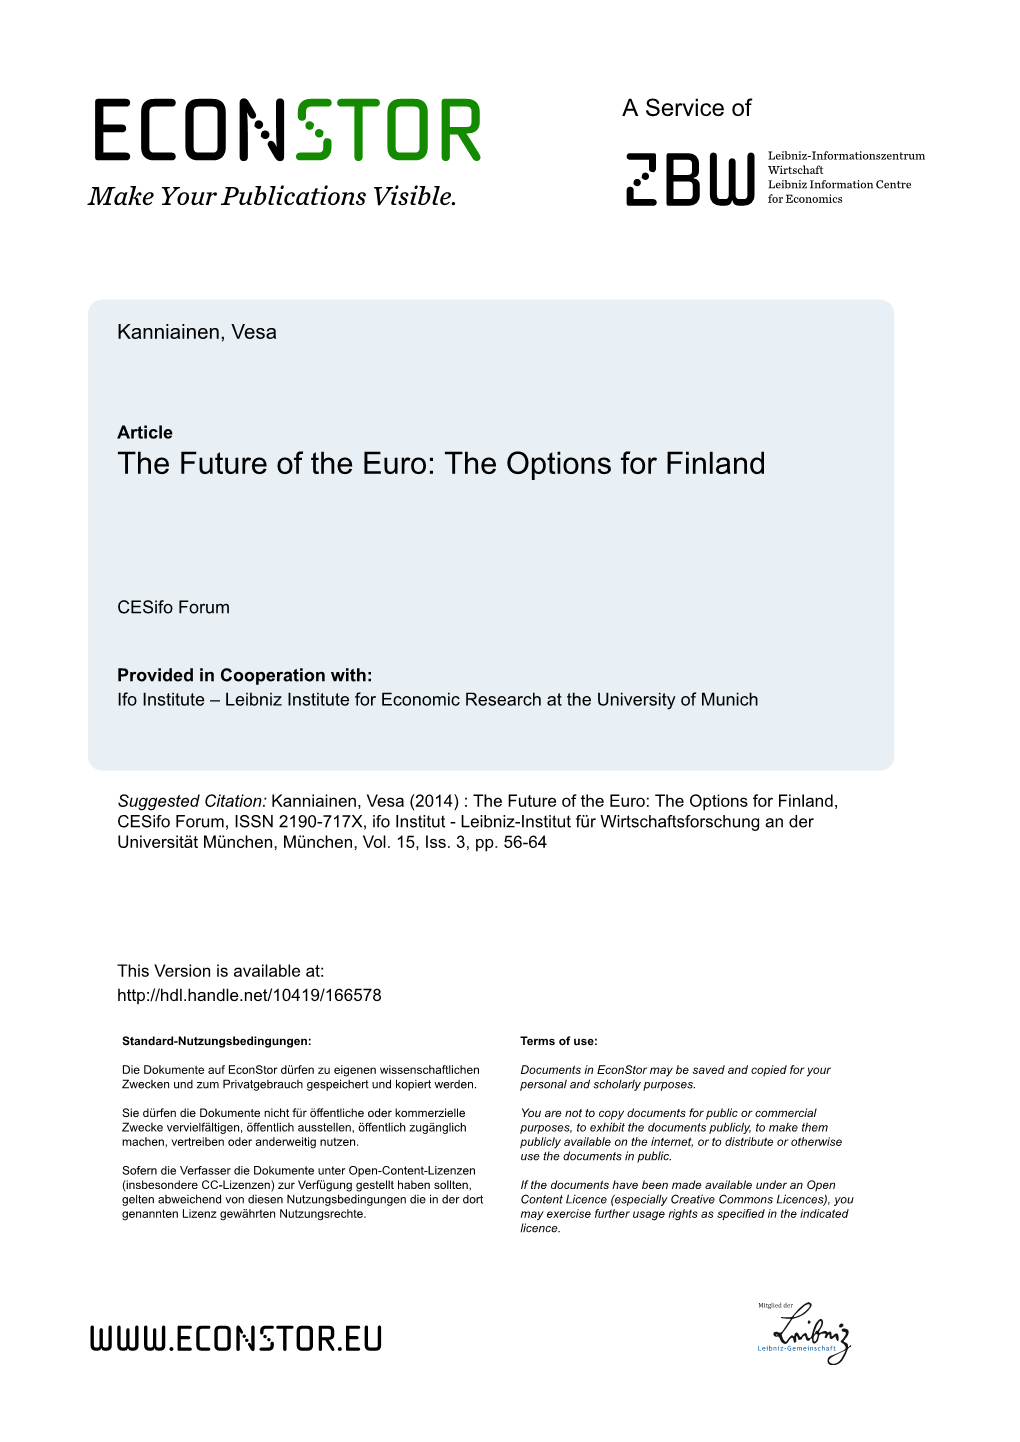 The Future of the Euro: the Options for Finland